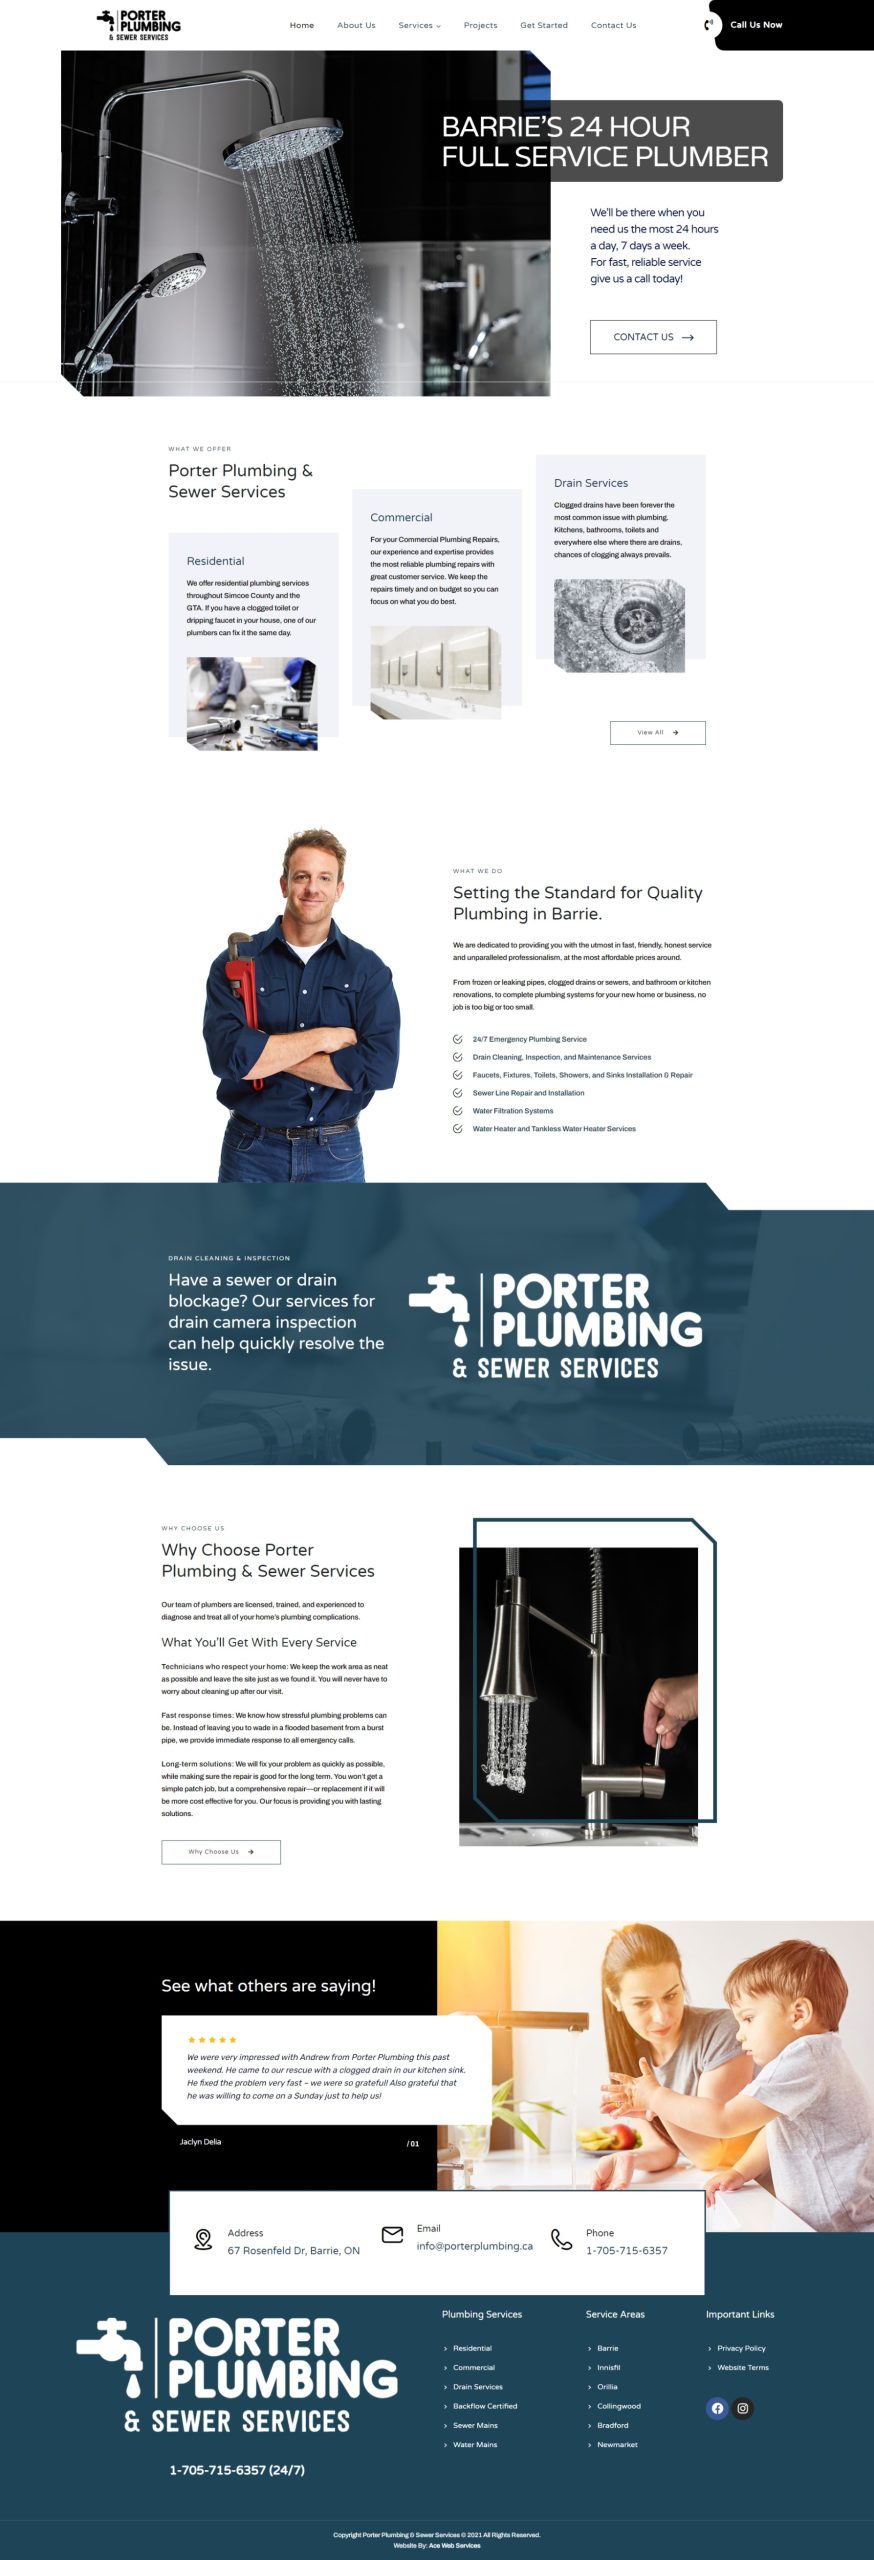 Porter Plumbing & Sewer Services